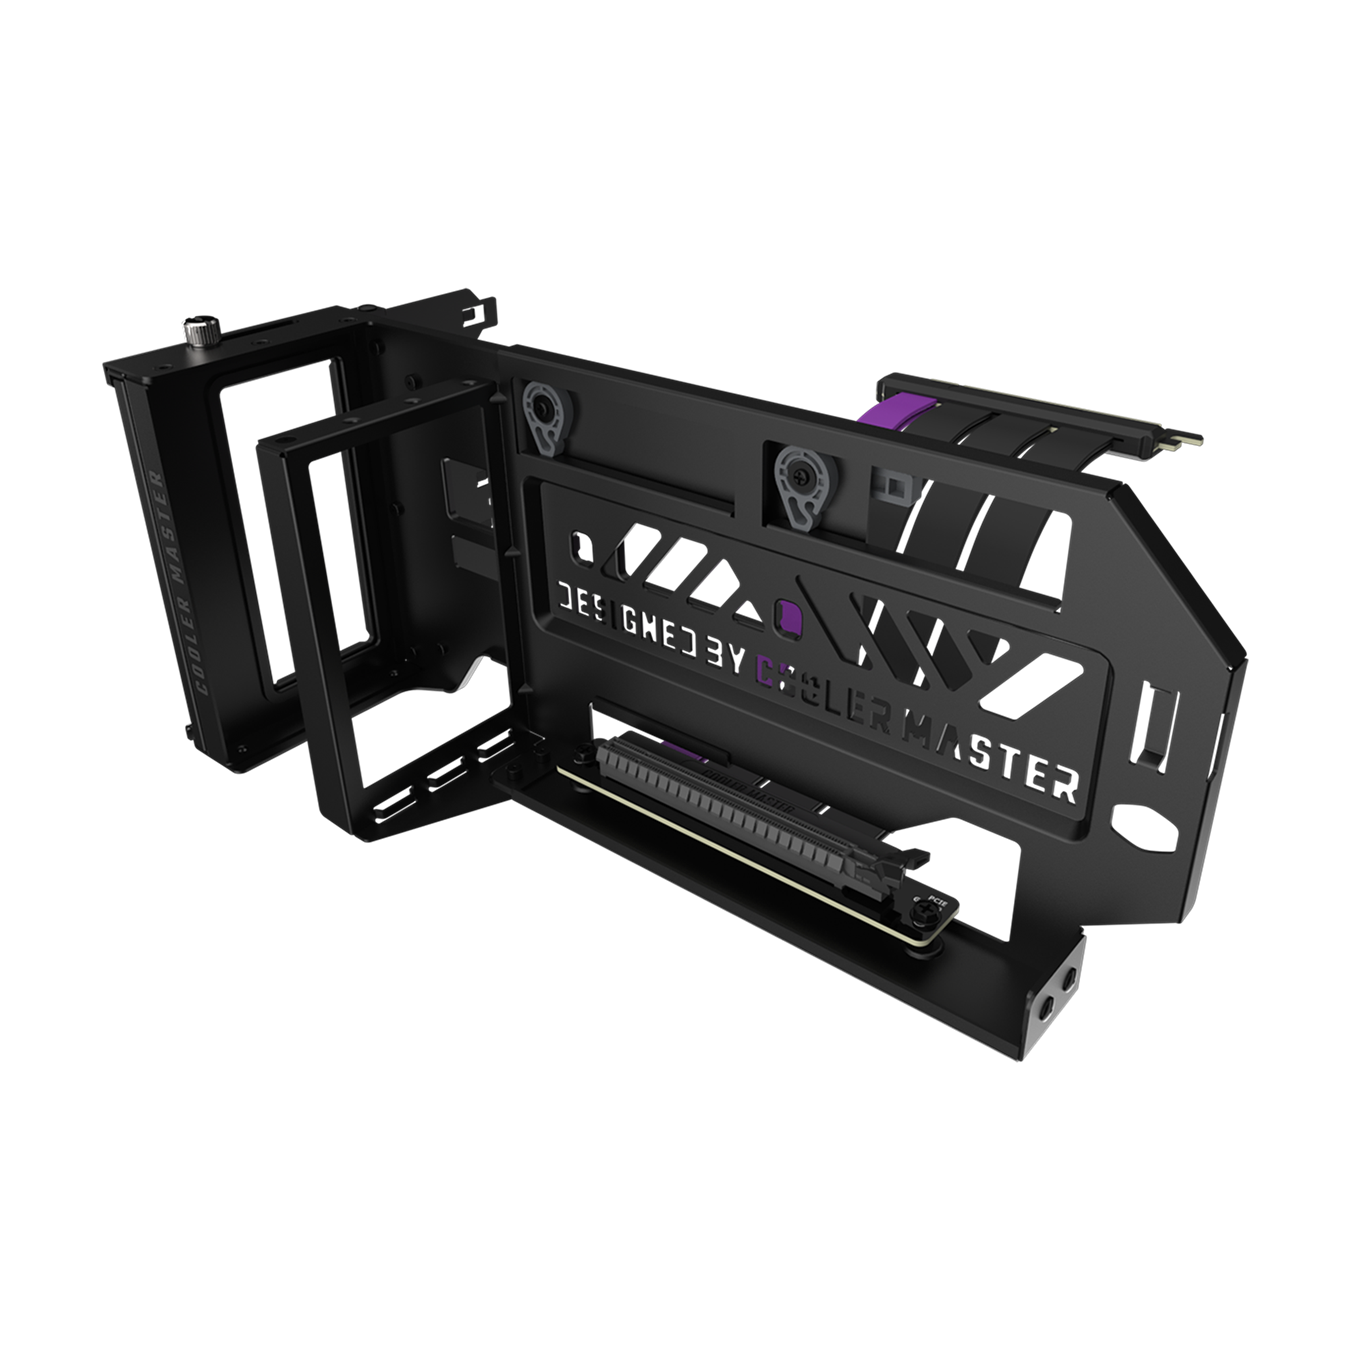 Vertical Graphics Card Holder Kit V3 - The modular design accommodates graphics cards of all sizes and supports various RAM and motherboard layouts.